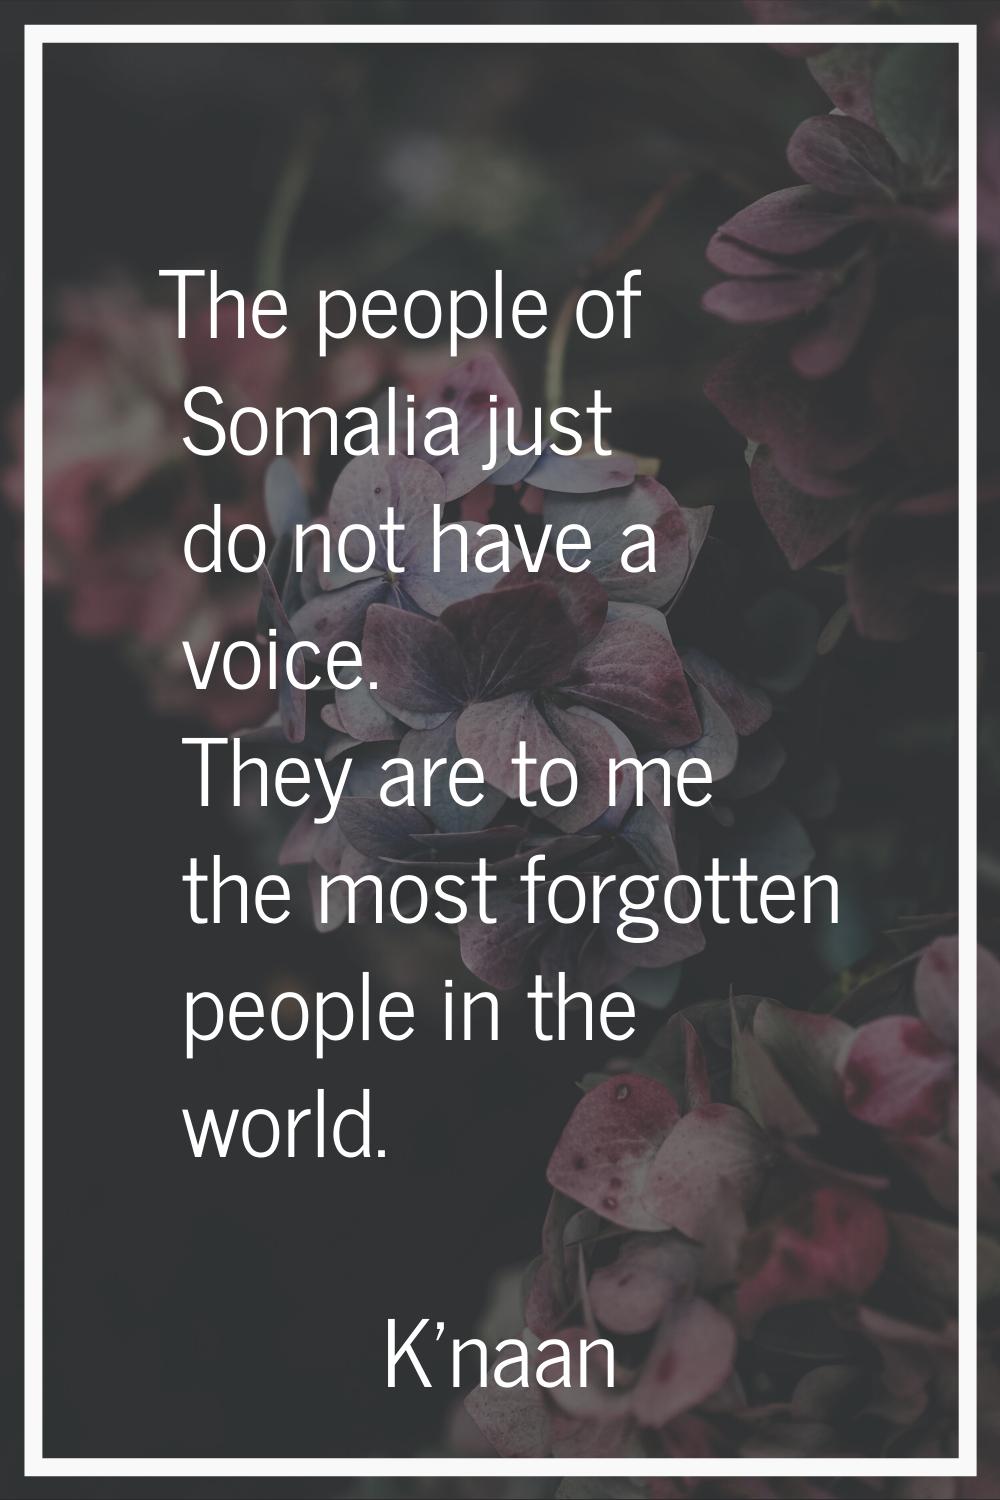 The people of Somalia just do not have a voice. They are to me the most forgotten people in the wor